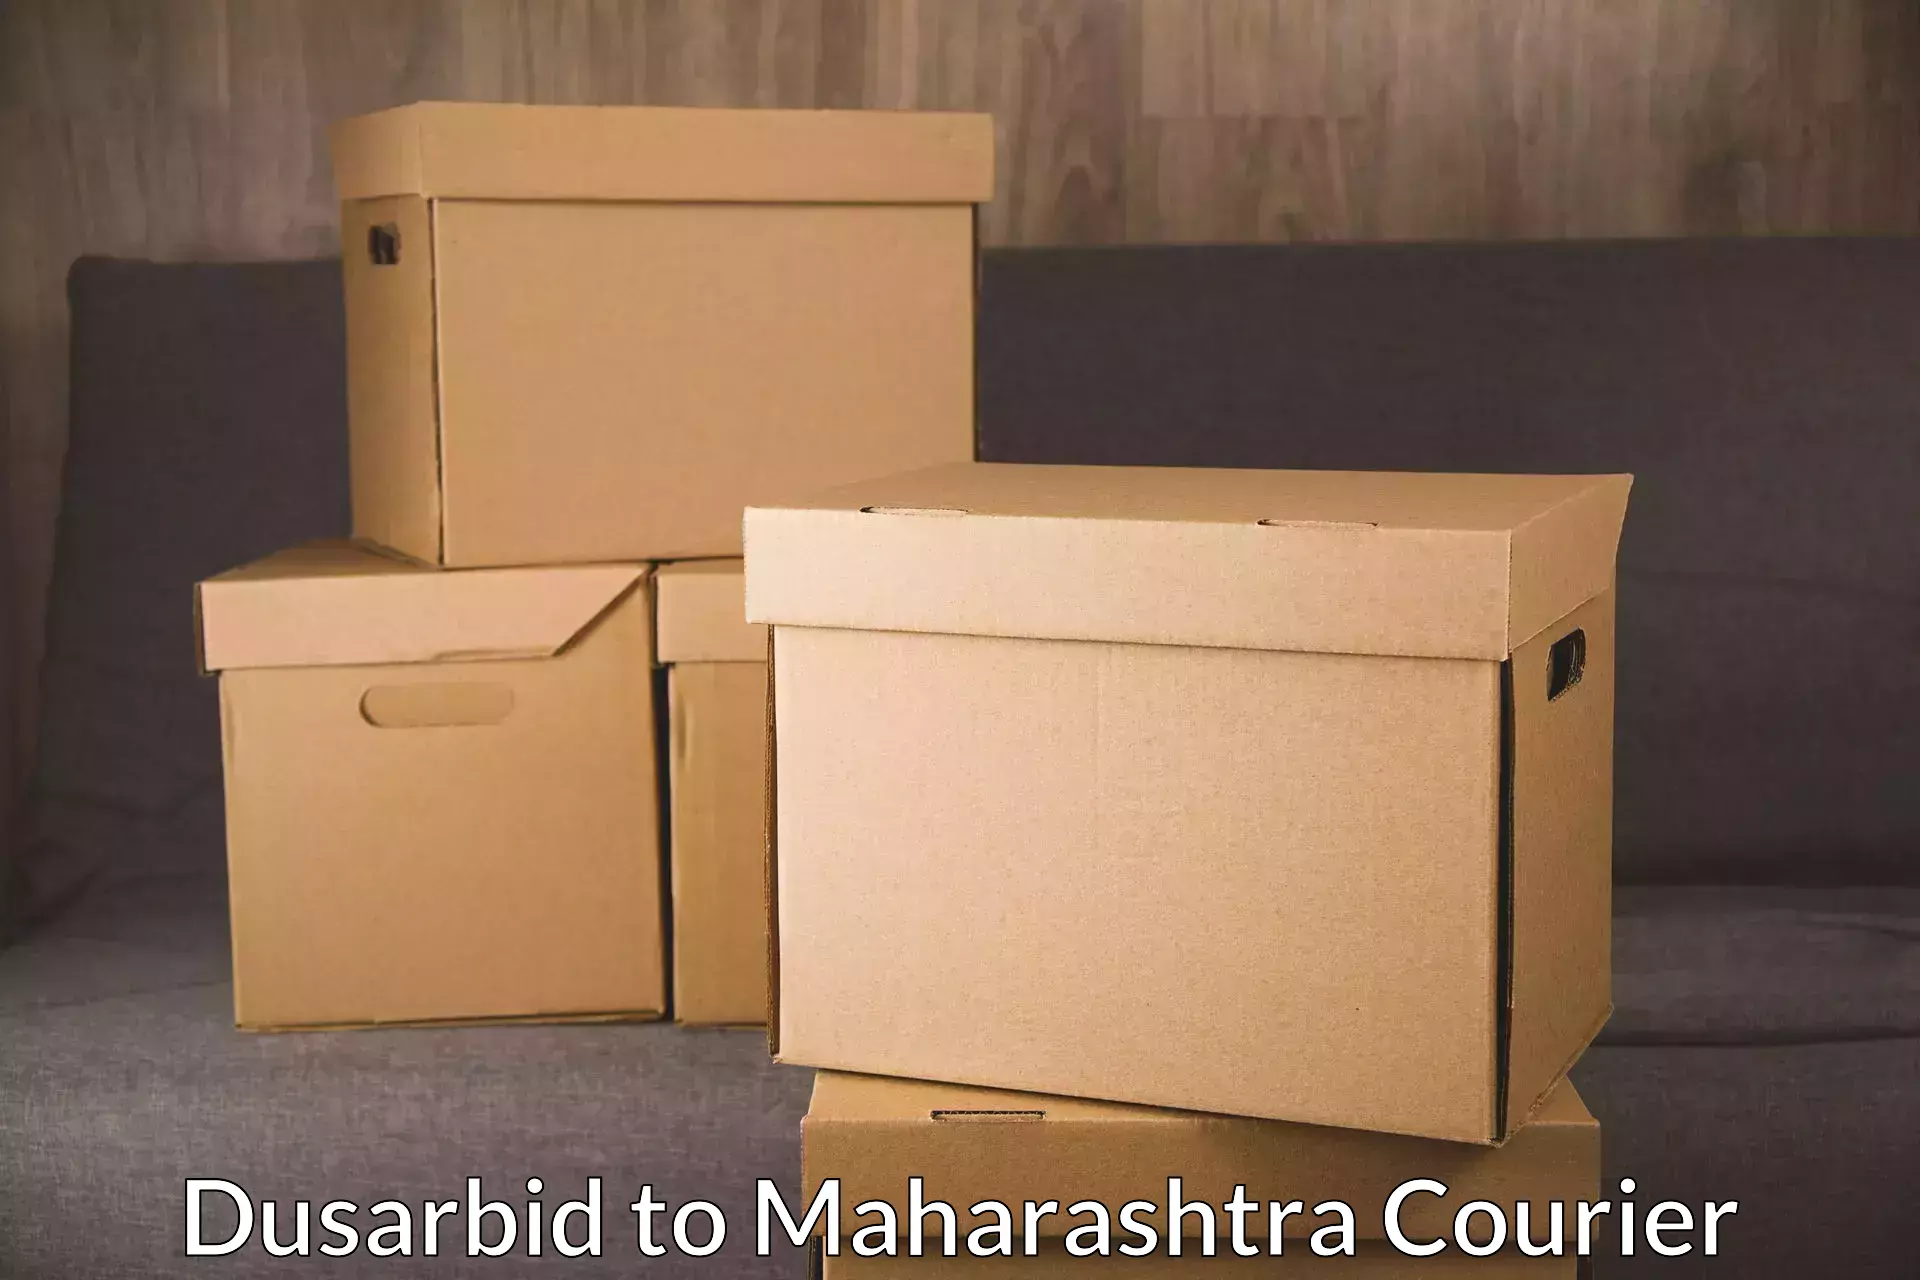 Courier service booking Dusarbid to Mahabaleshwar